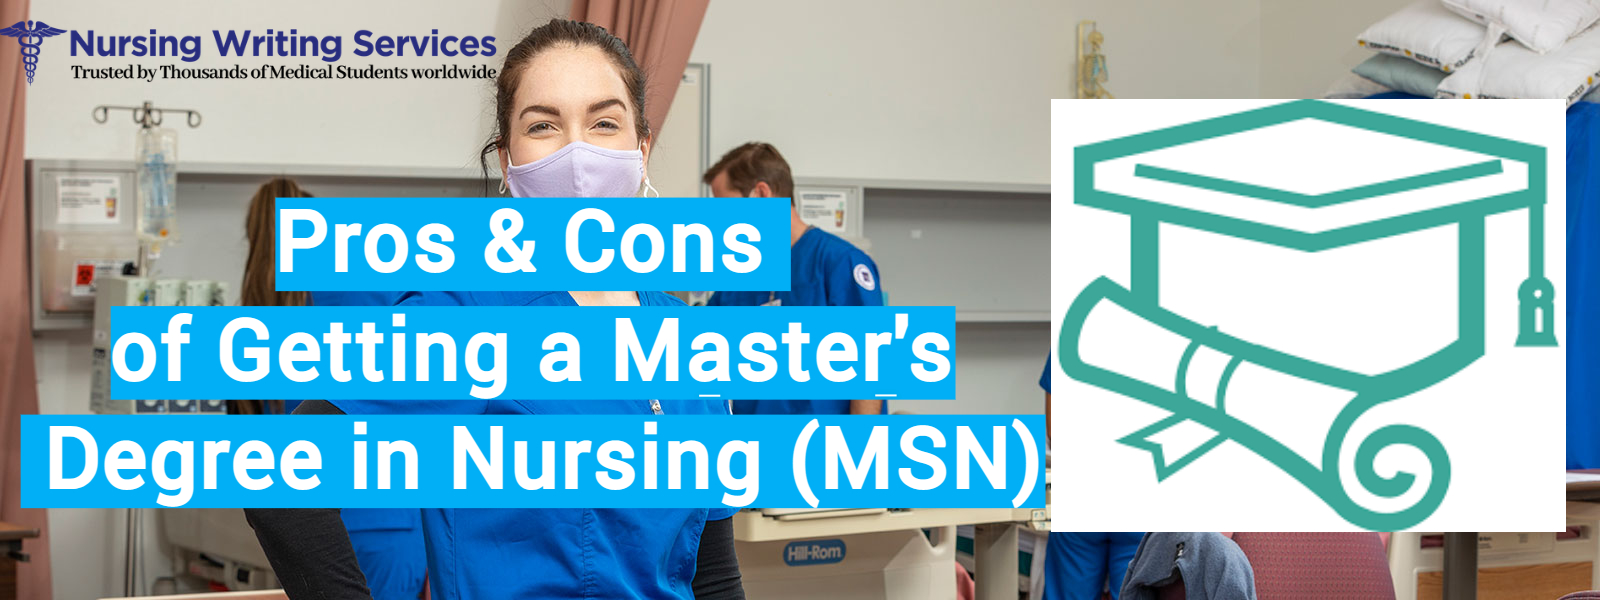 Pros & Cons of Getting a Master's Degree in Nursing (MSN)